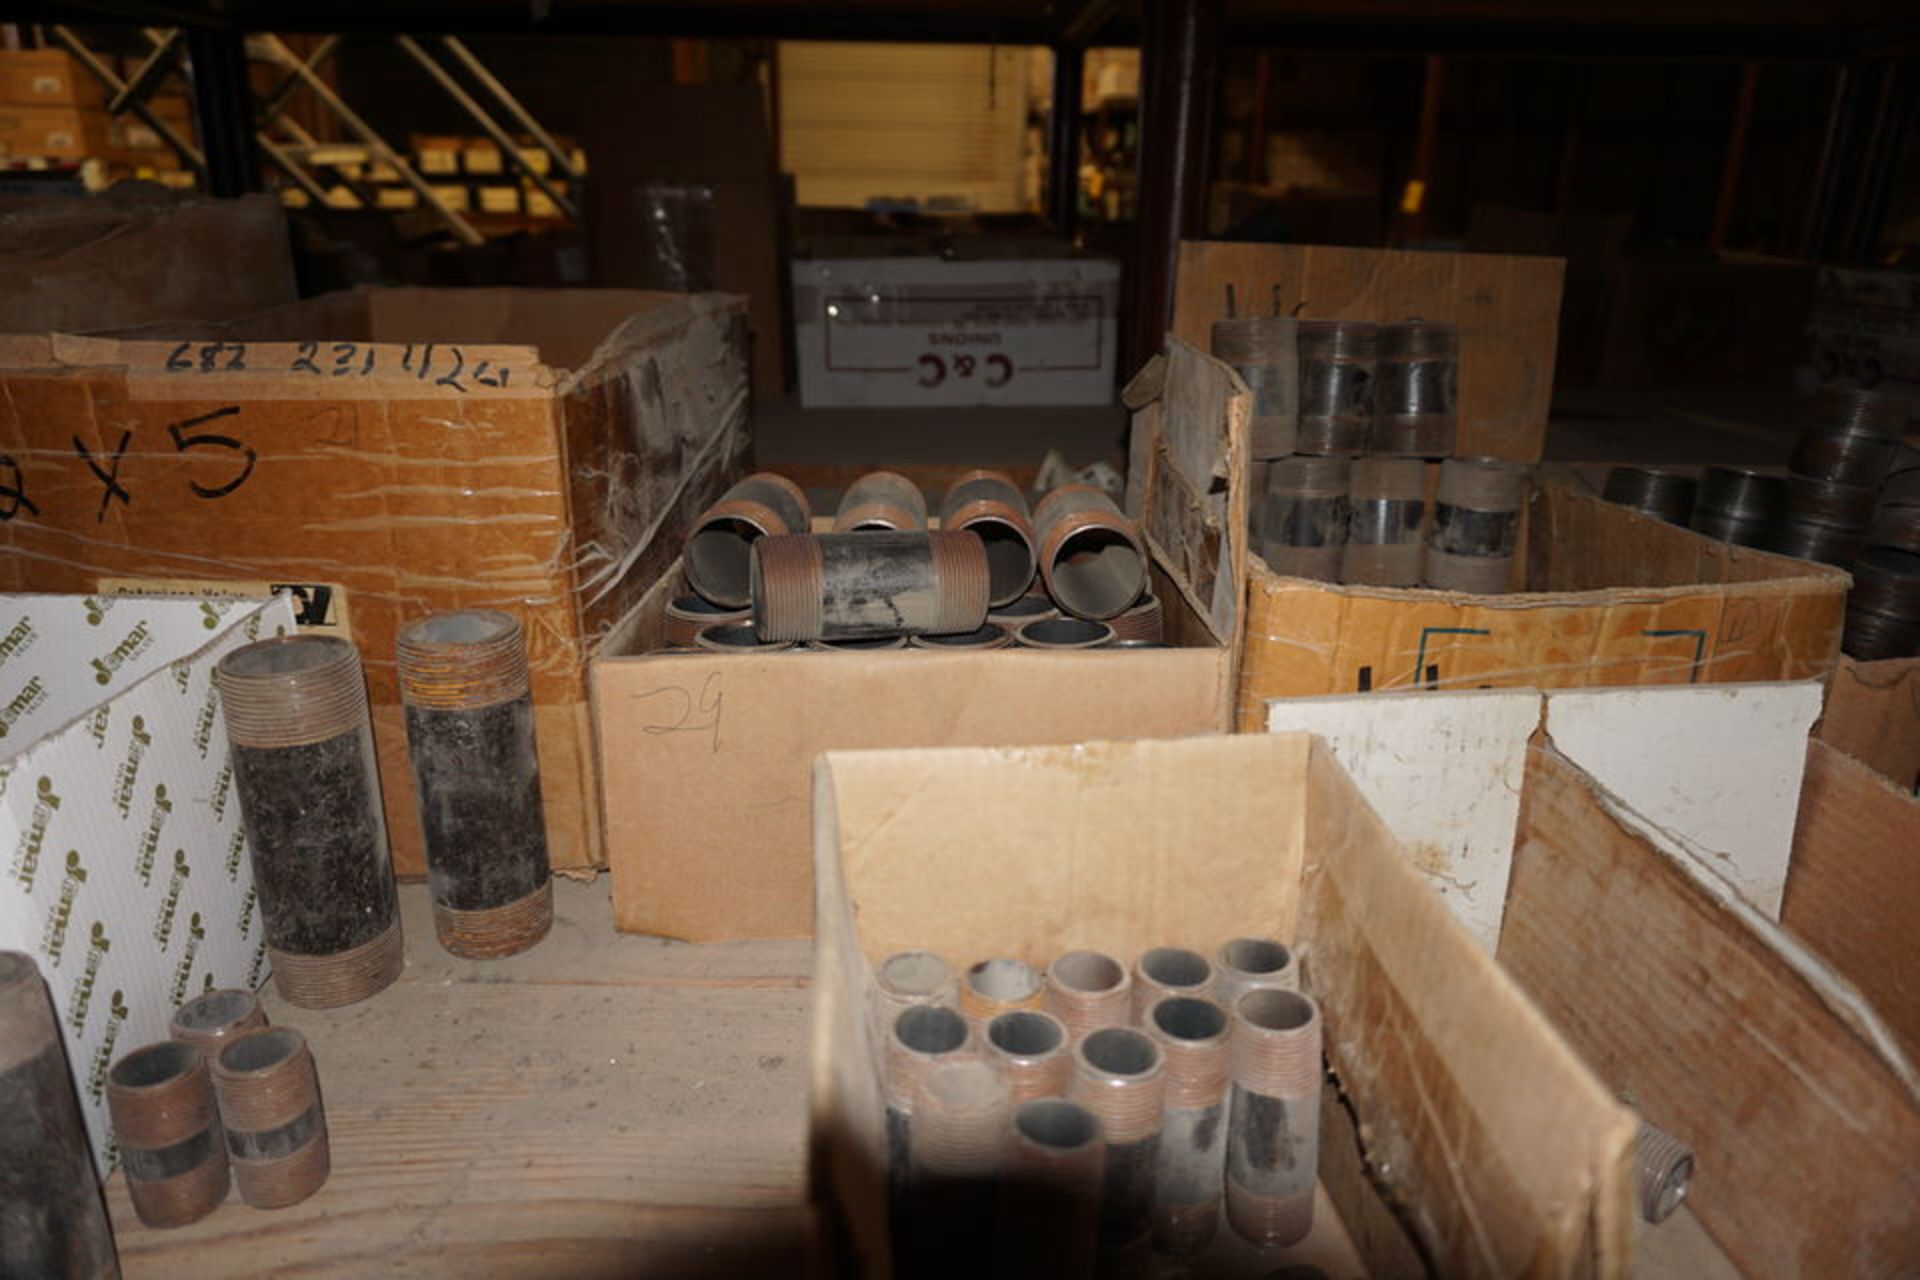 CONT OF SHELF: ASSORT SIZE PIPE NIPPLES, L'S, BELL RODS, REDUCERS, RANGE 1/8" TO 3" APPROX 400 PCS - Image 4 of 16